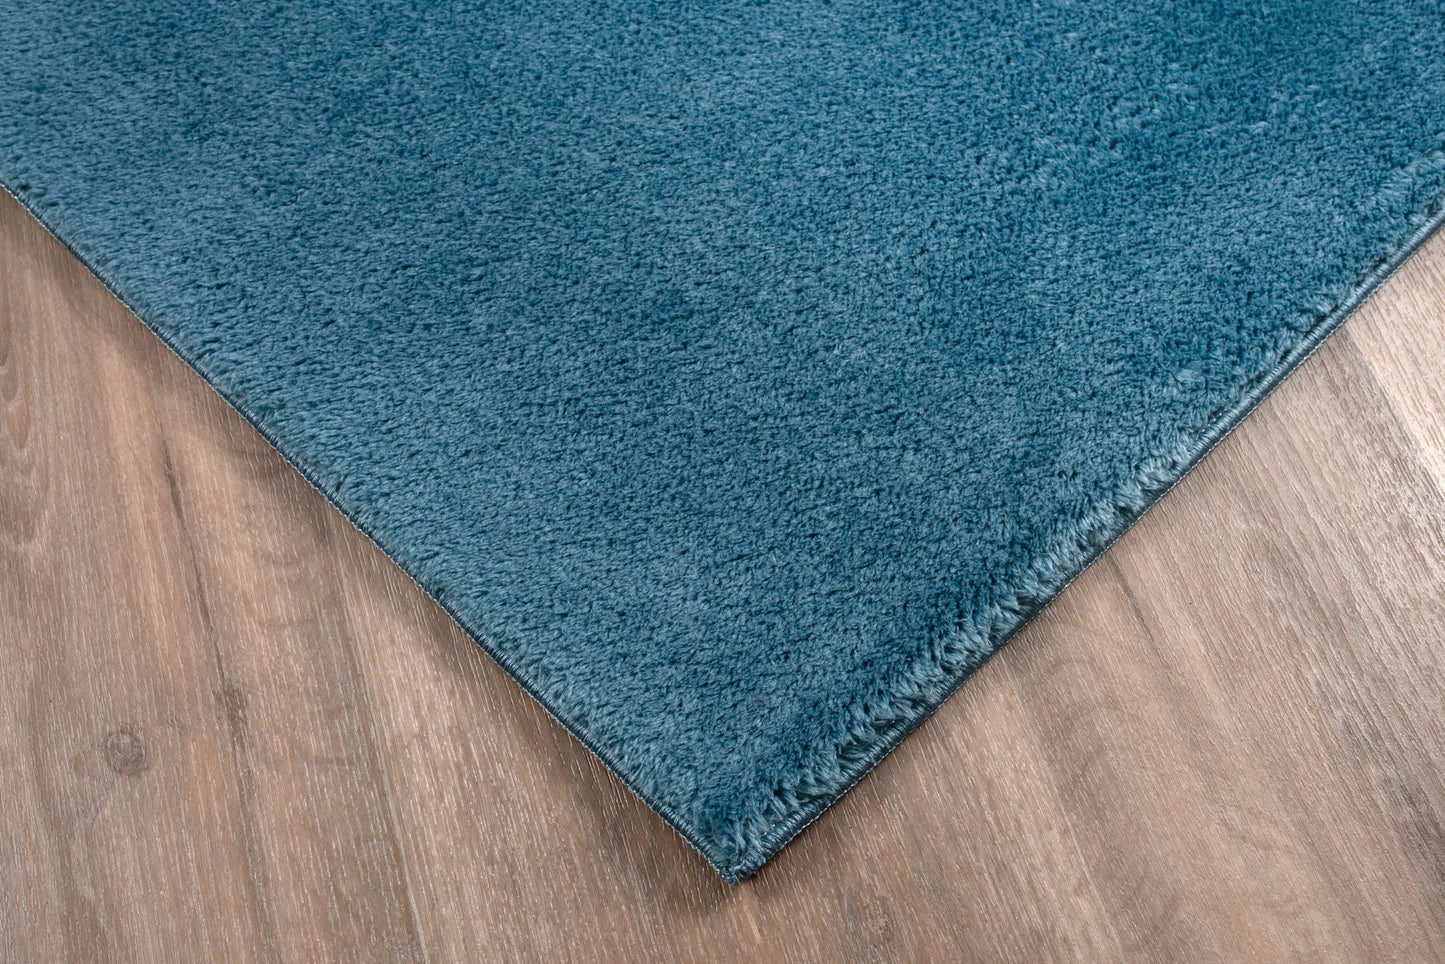 blue fluffy soft machine washable area rug for living room bedroom 4x6, 4x5 ft Small Carpet, Home Office, Living Room, Bedroom